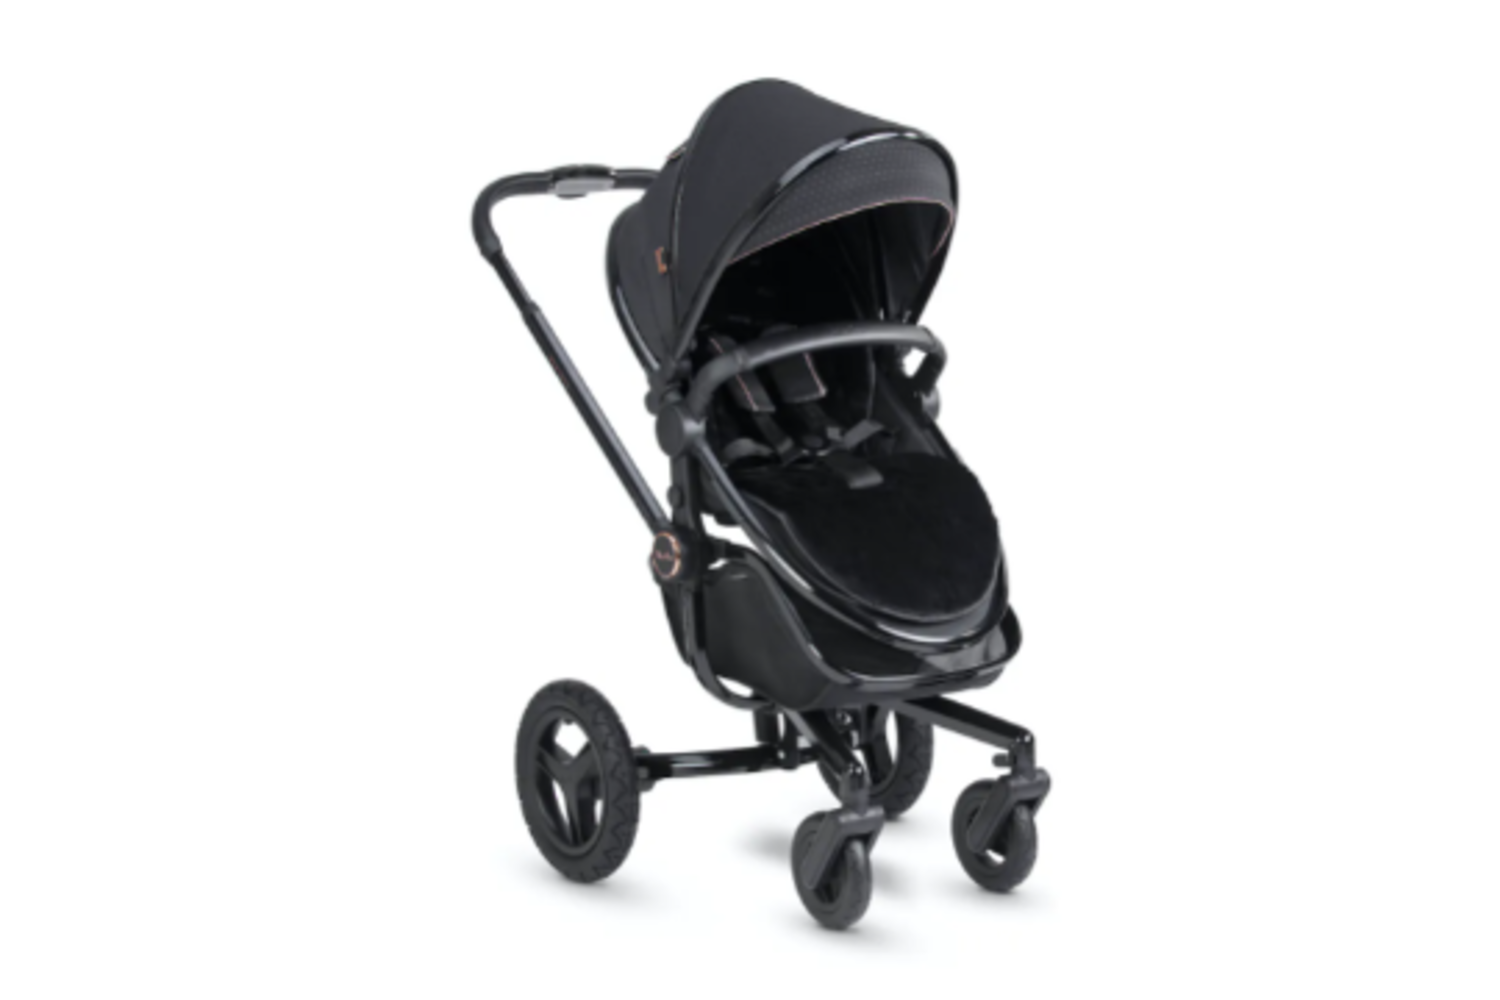 Liquidation Sale of Brand New Boxed Silver Cross Prams & Pram Sets - Delivery & Collection Available